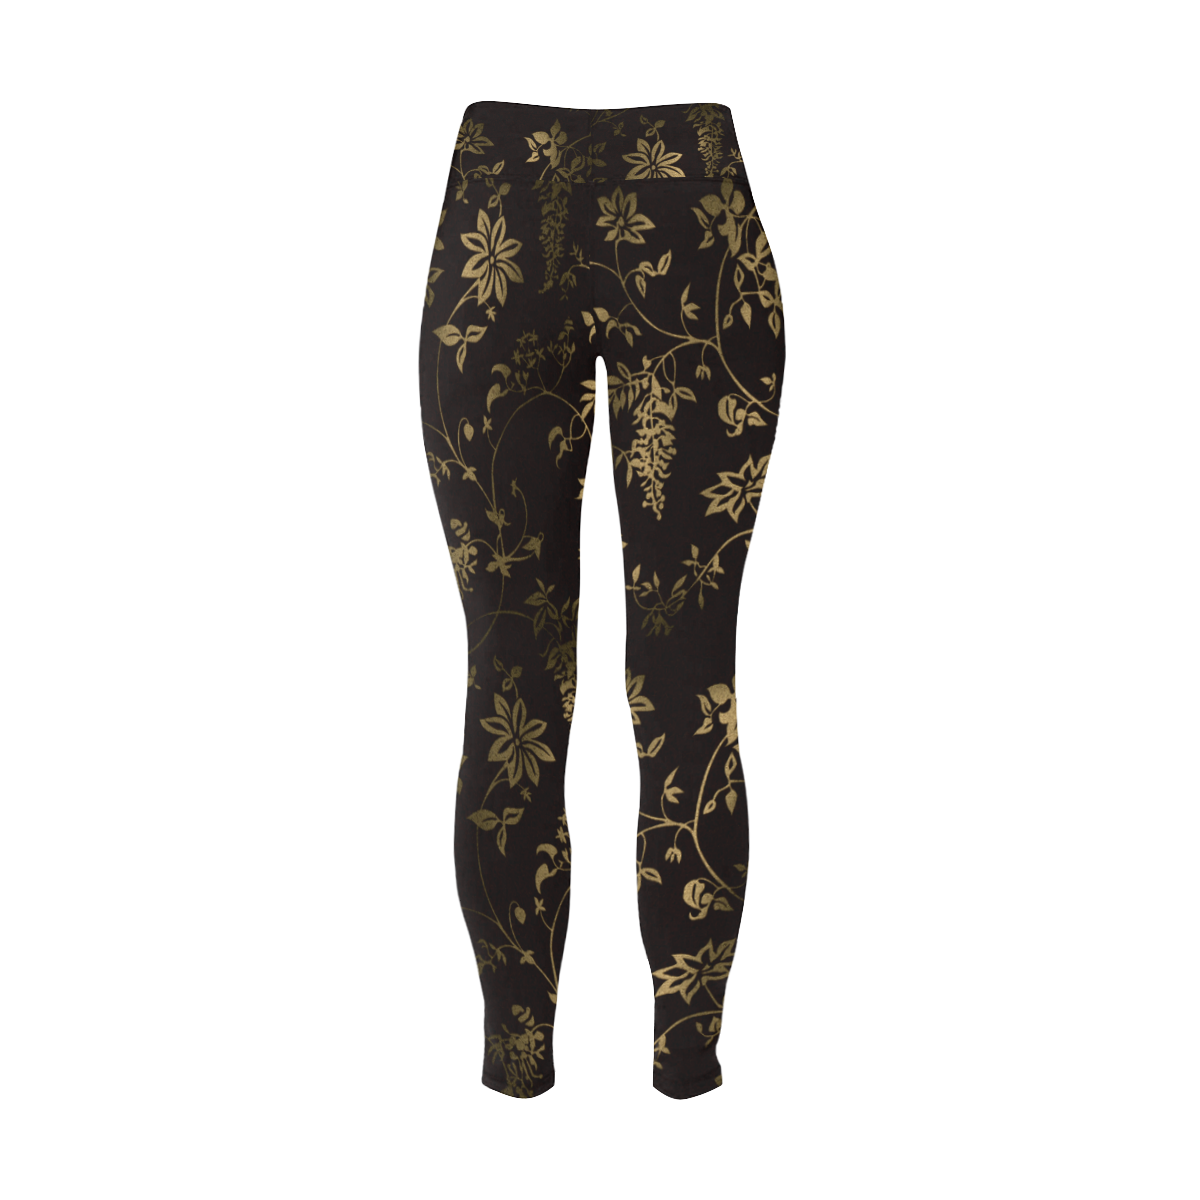 Gothic Victorian Black And Gold Pattern Women's Plus Size High Waist Leggings (Model L44)